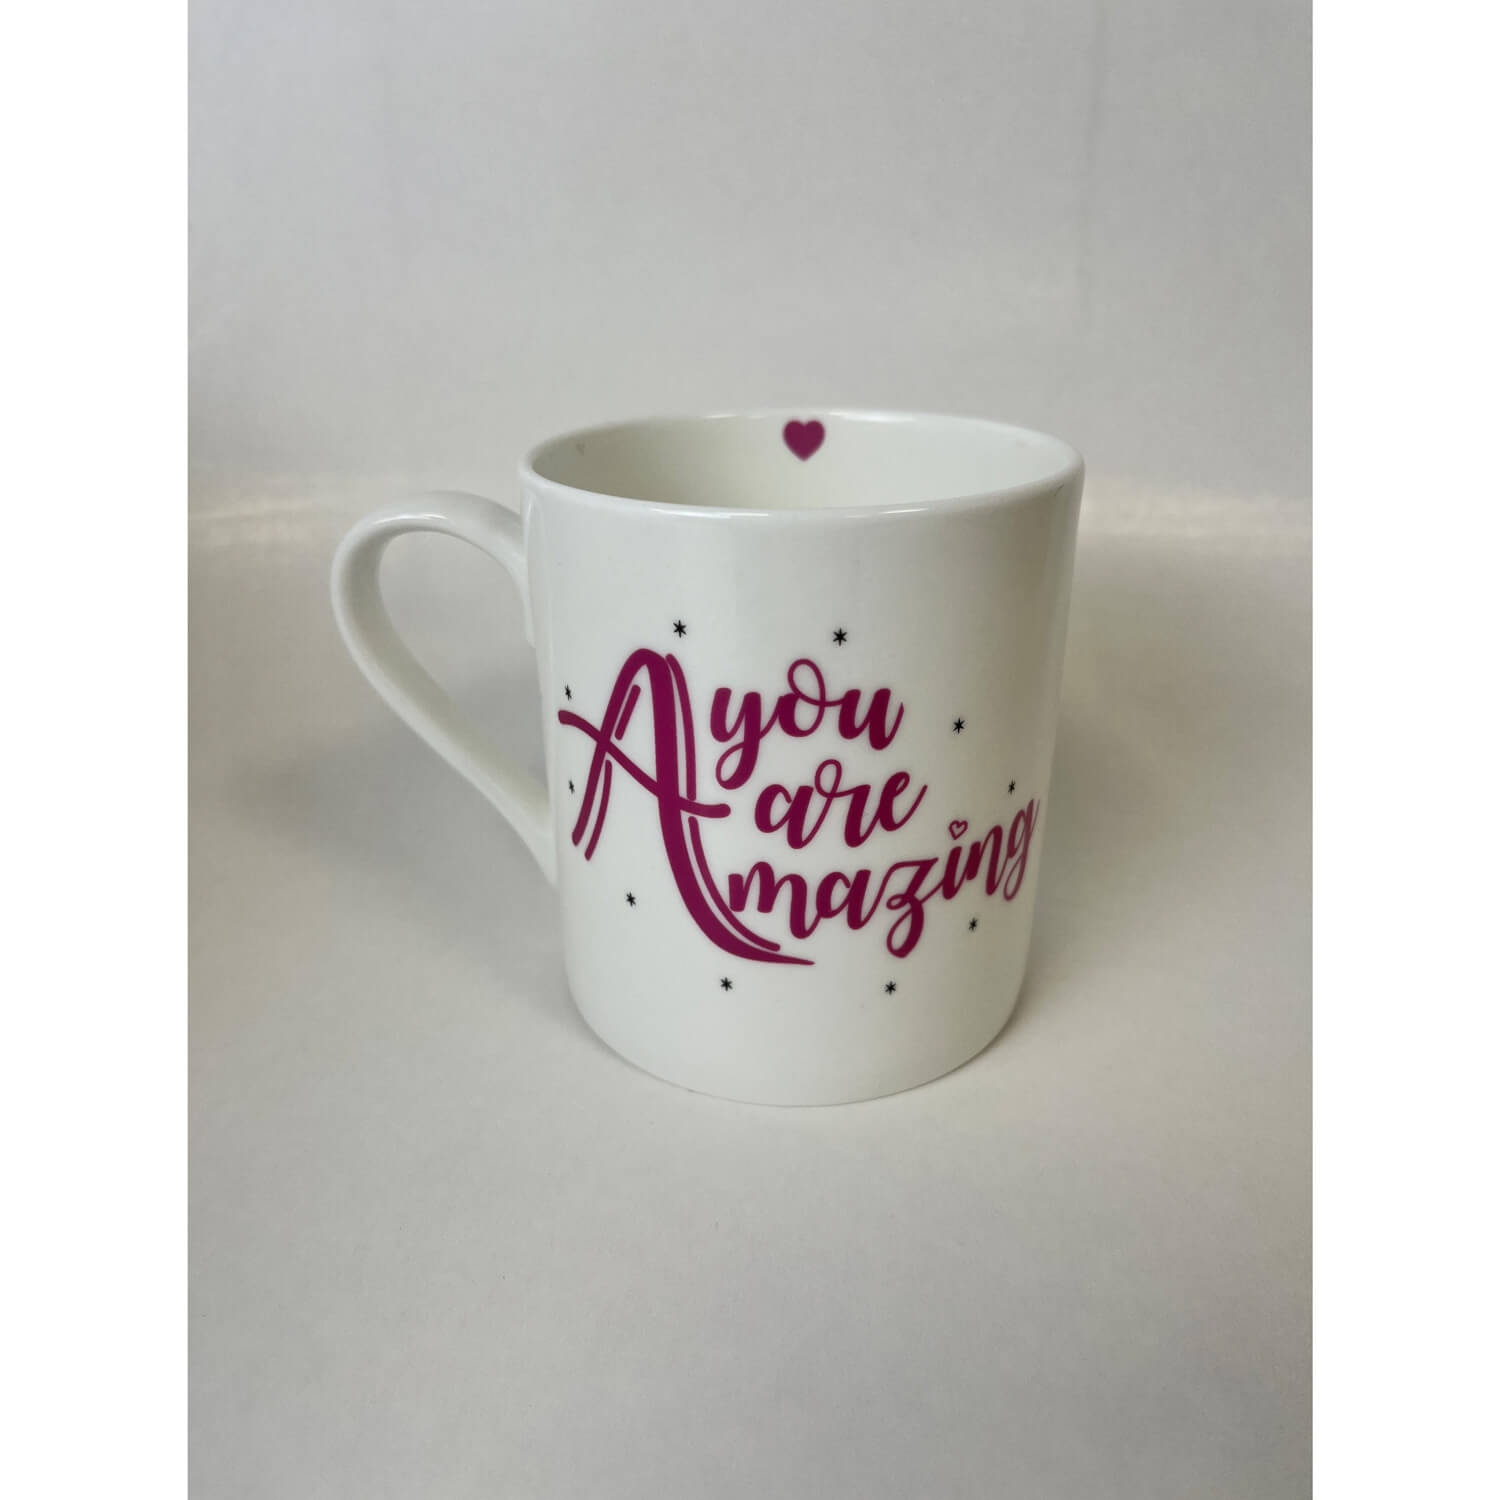 Love The Mug You Are Amazing 1 Shaws Department Stores